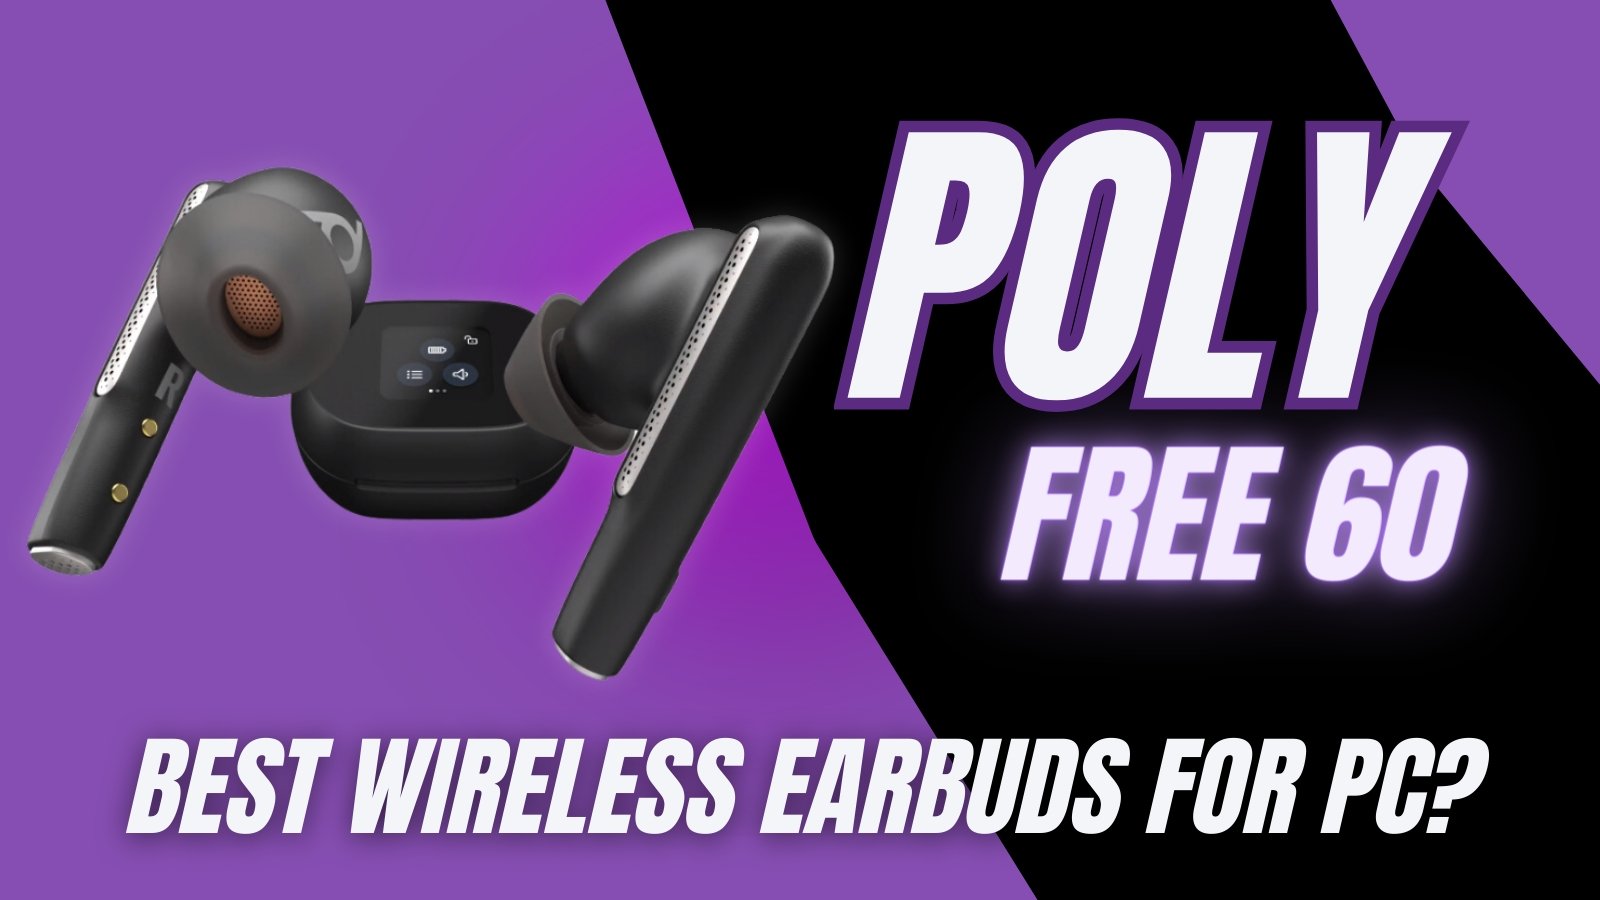 Are The Poly Voyager PC? For Free 60 Earbuds Best The